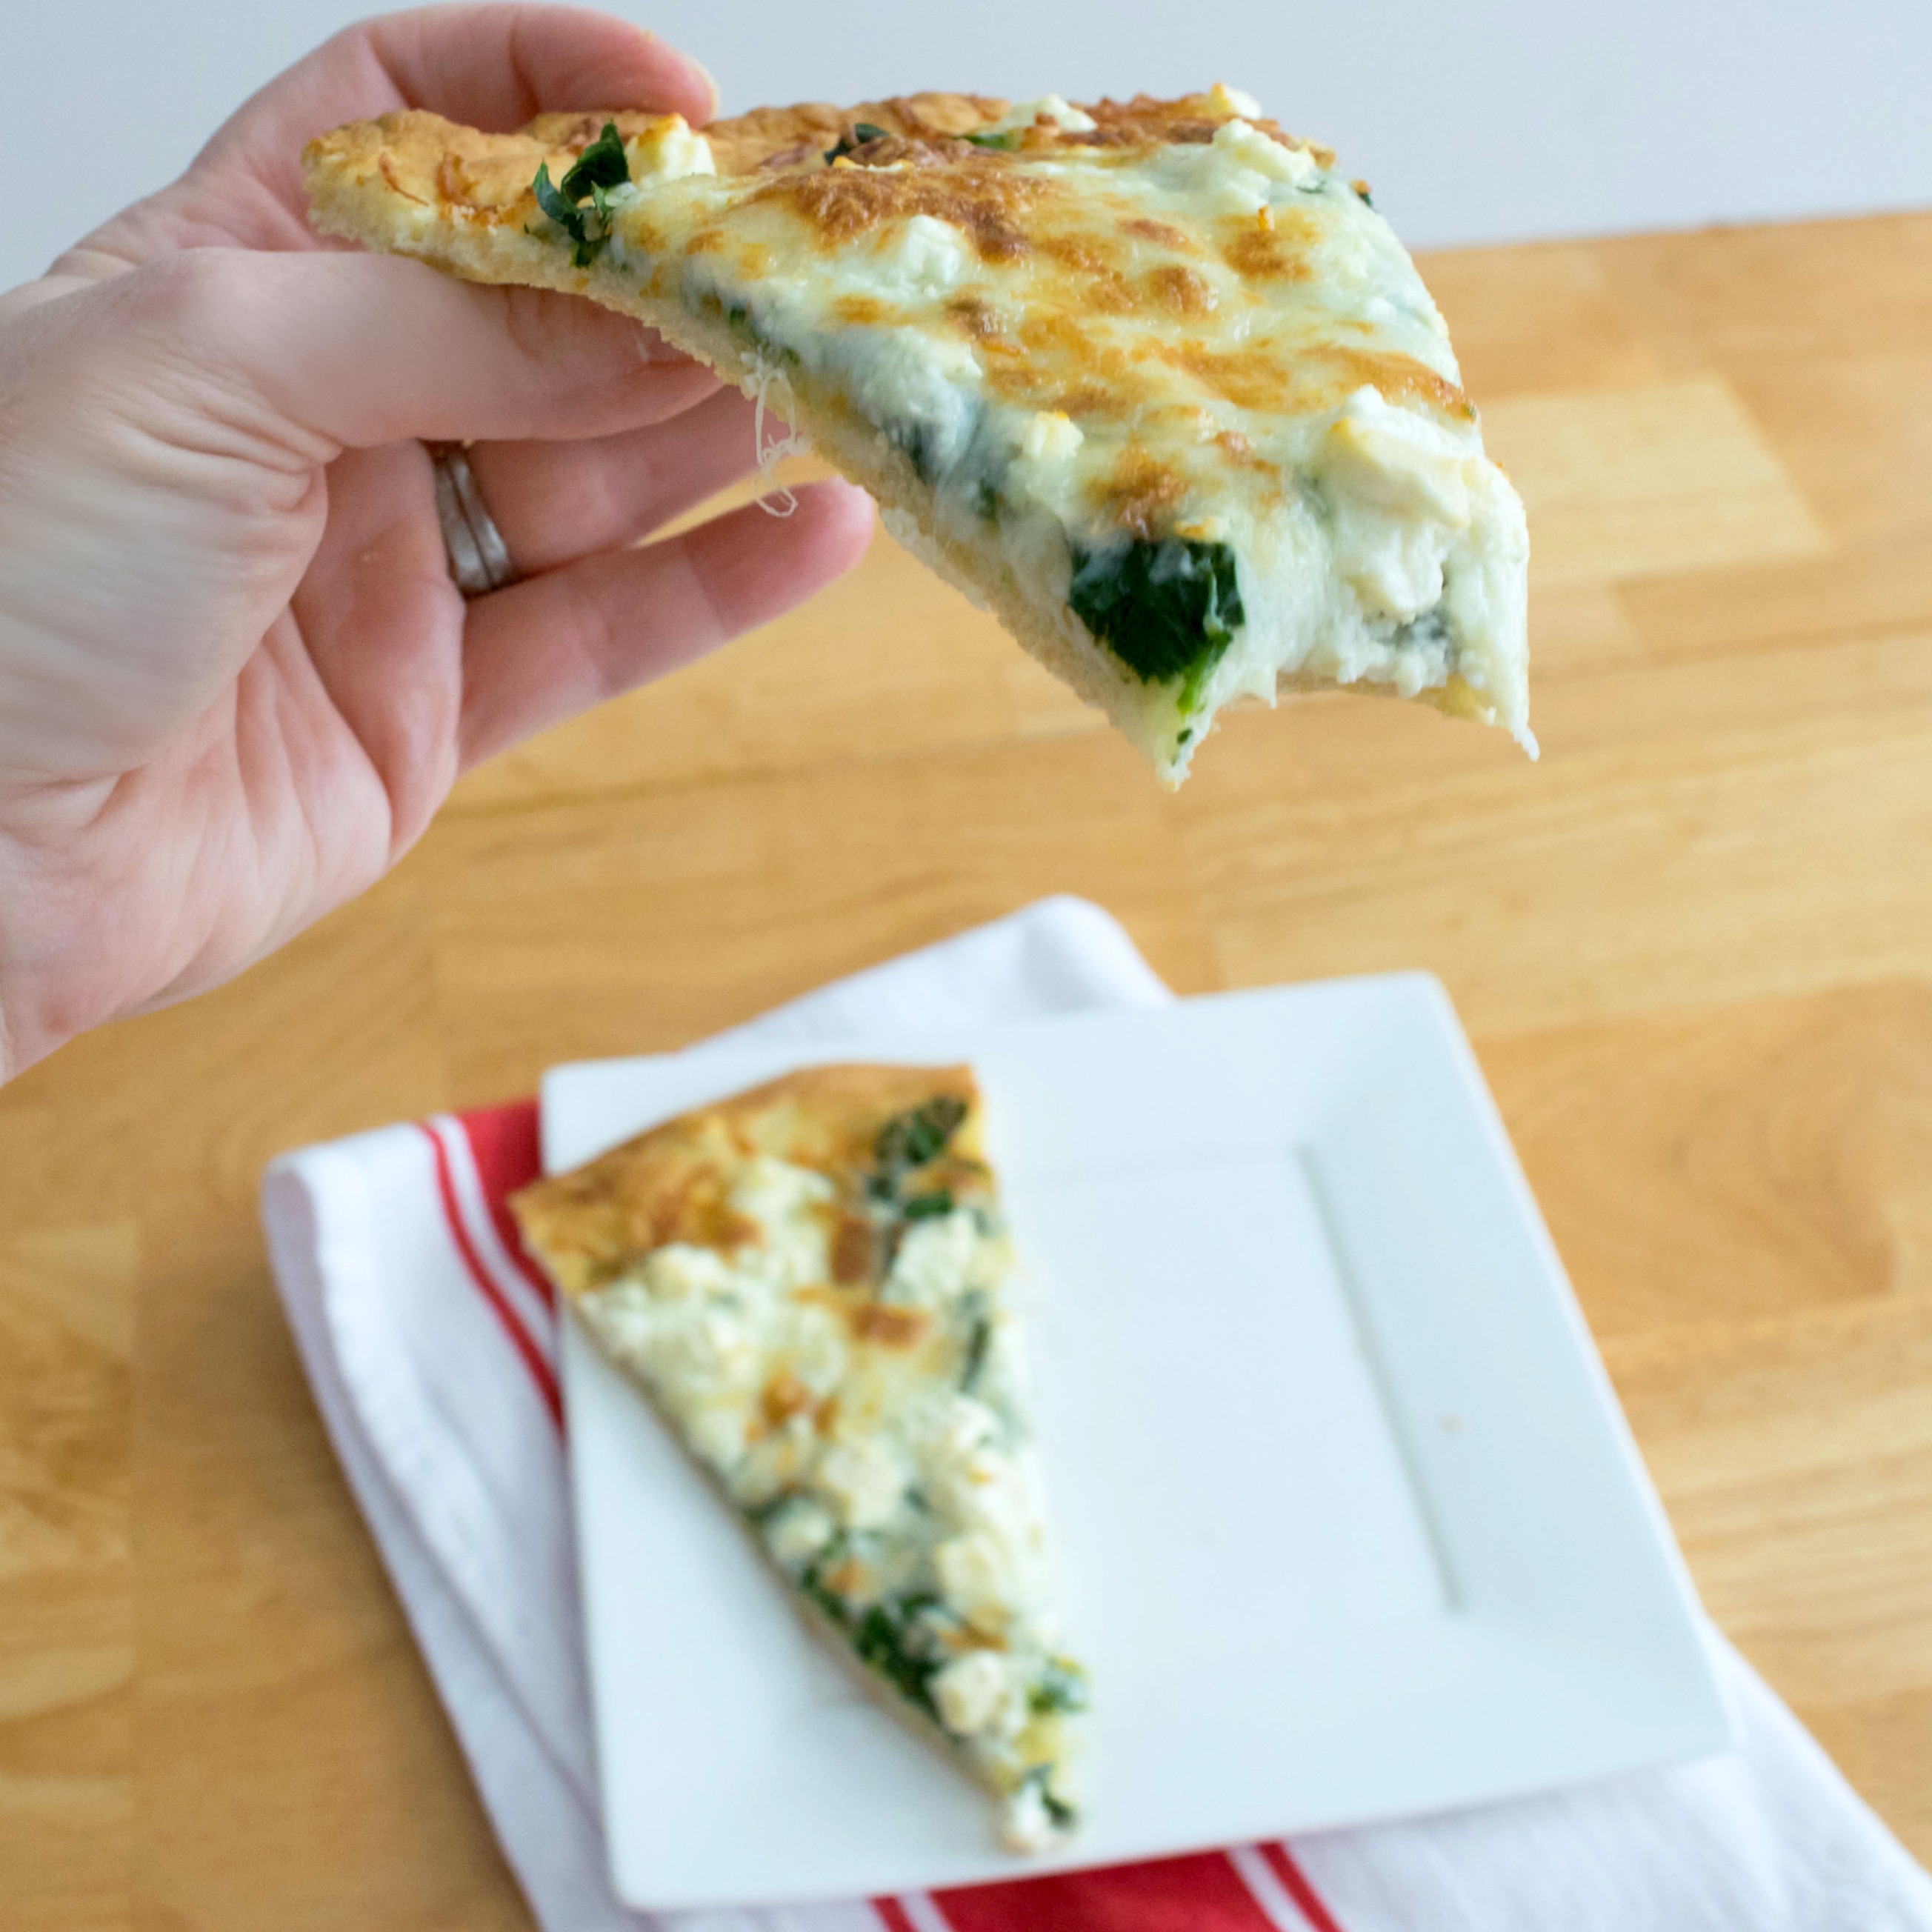 Spinach and Olive Oil Pizza